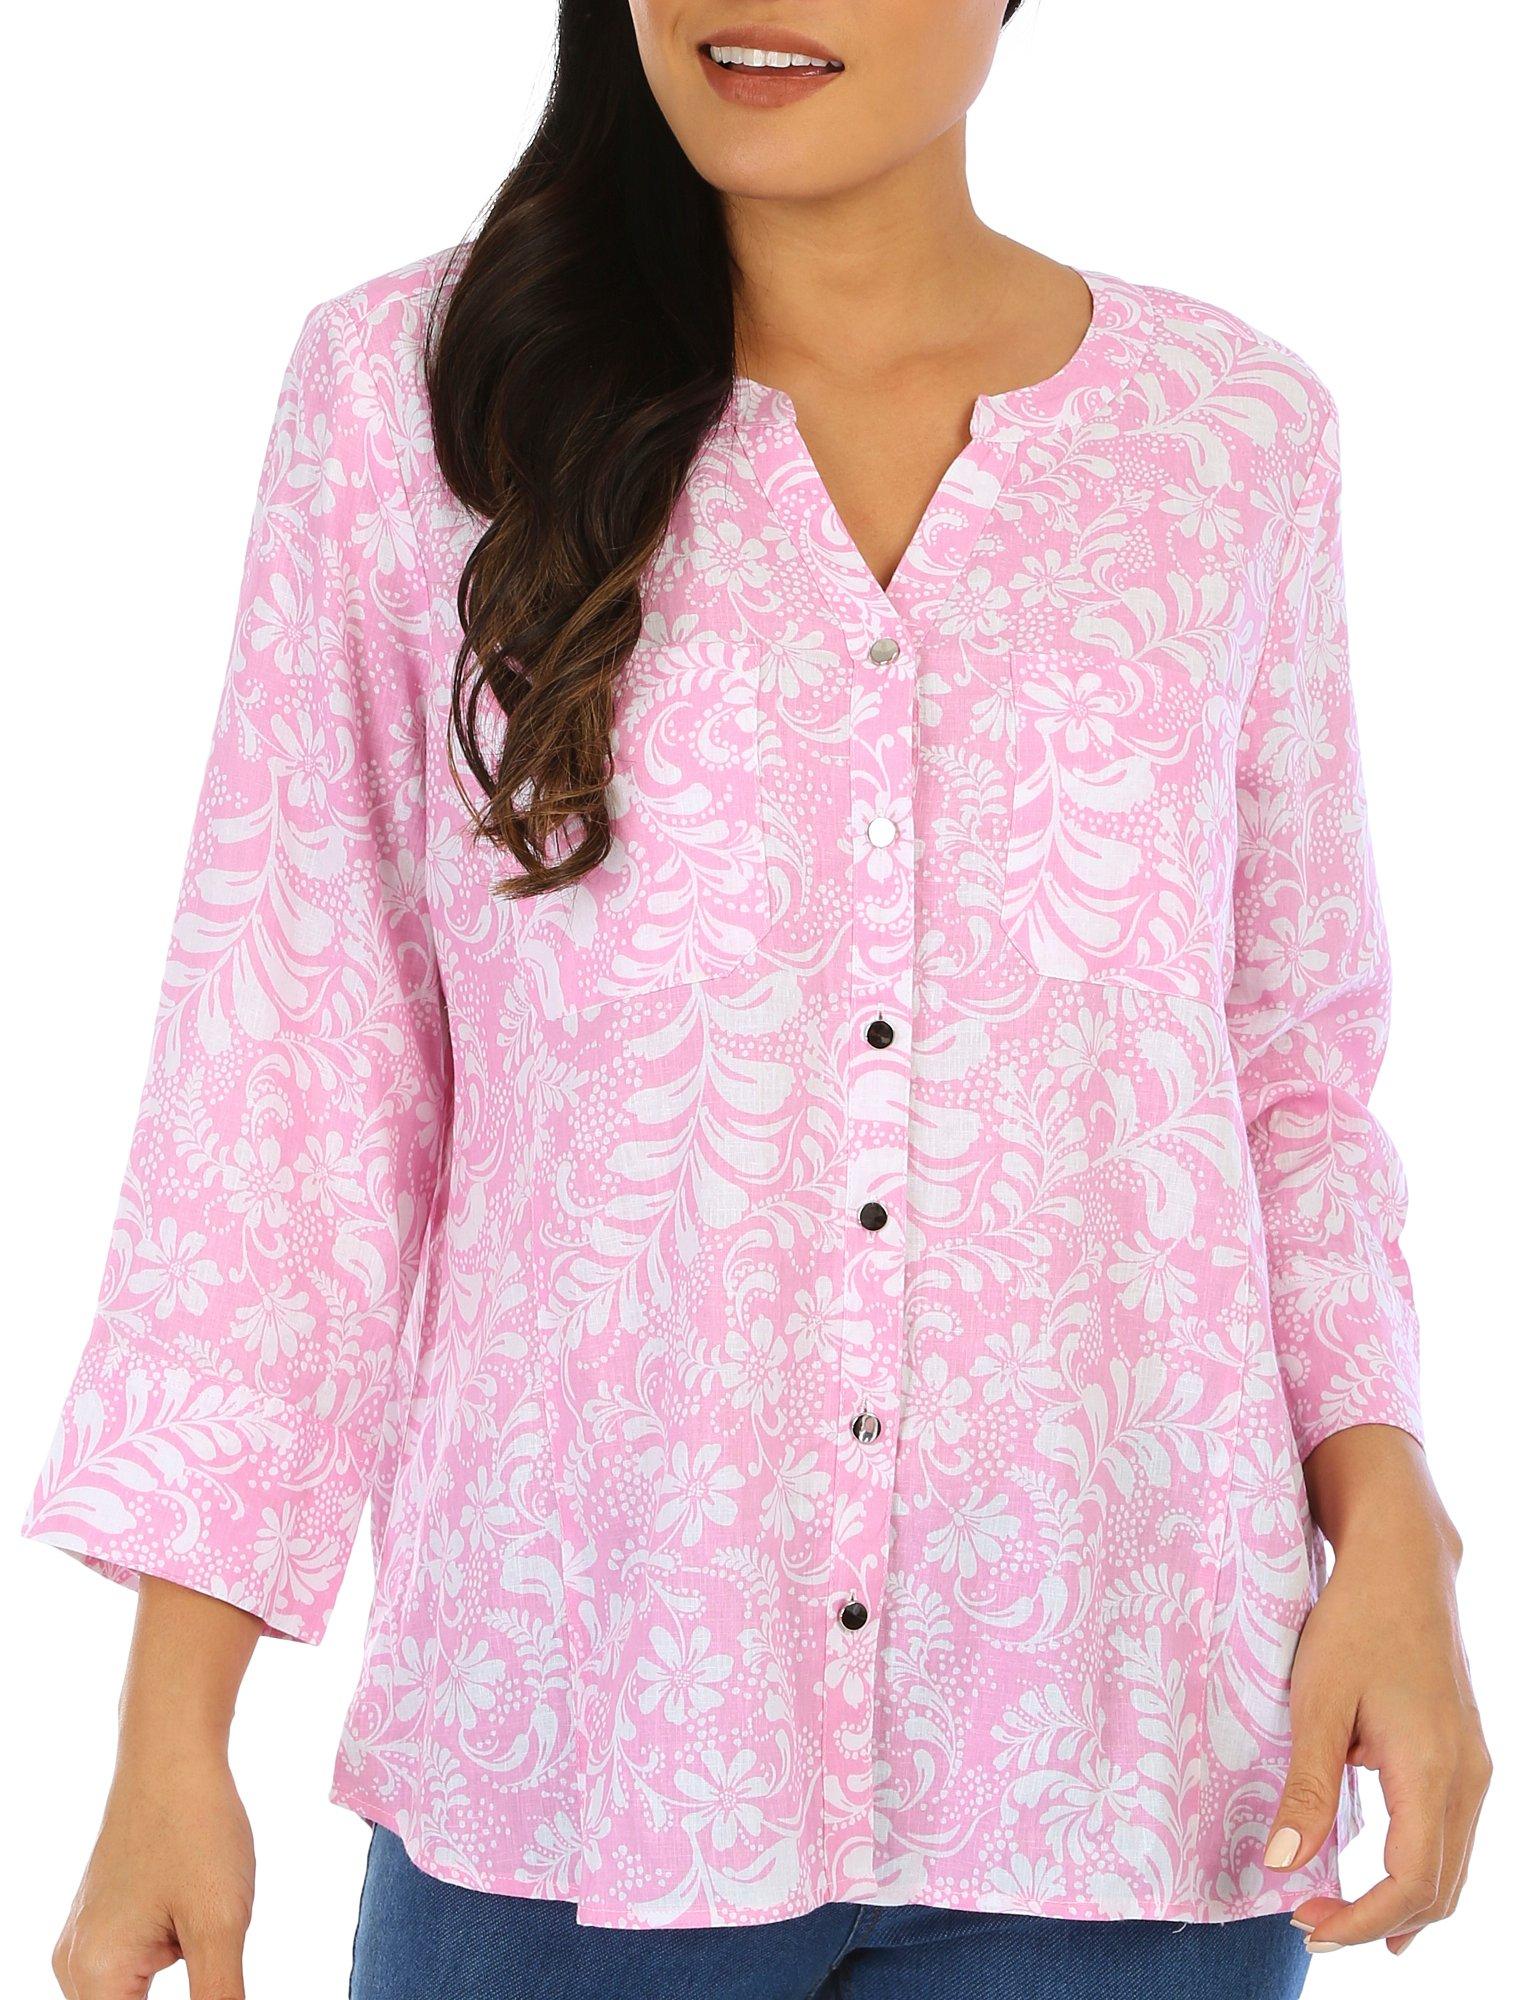 Coral Bay Womens Print Button Down 3/4 Sleeve Top